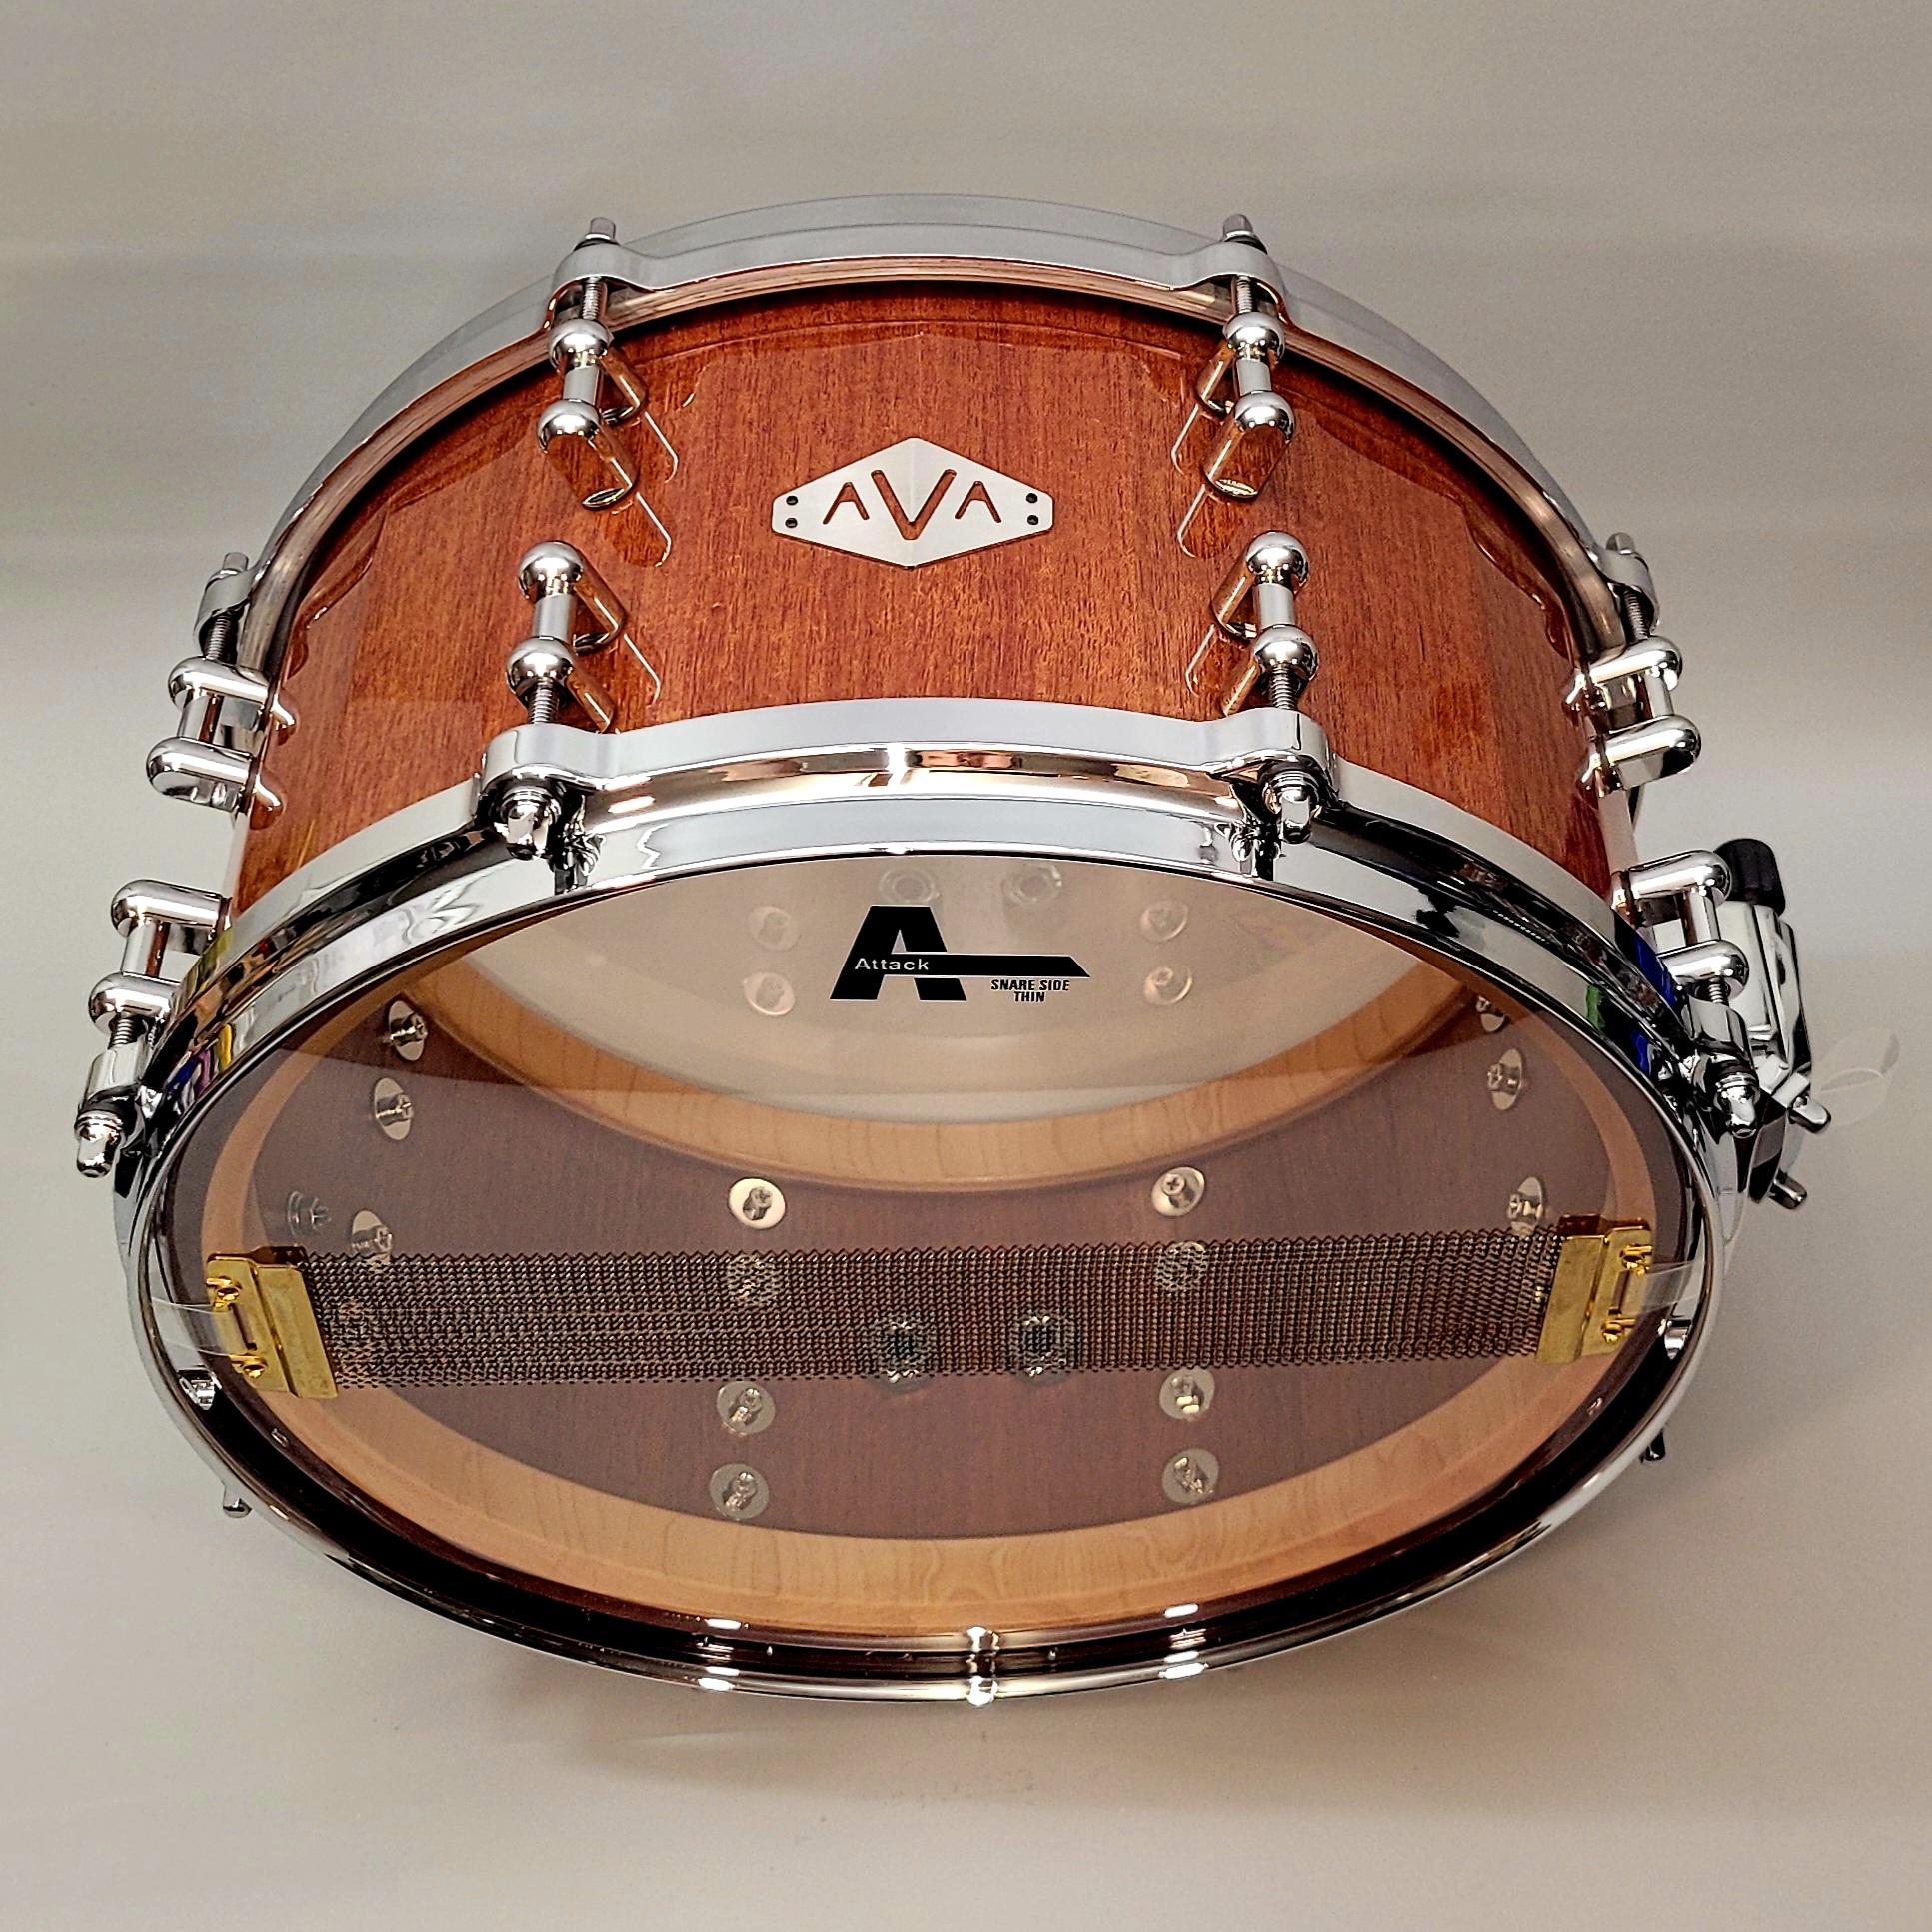 13 X 6.5 MAHOGANY STABLE-STAVE